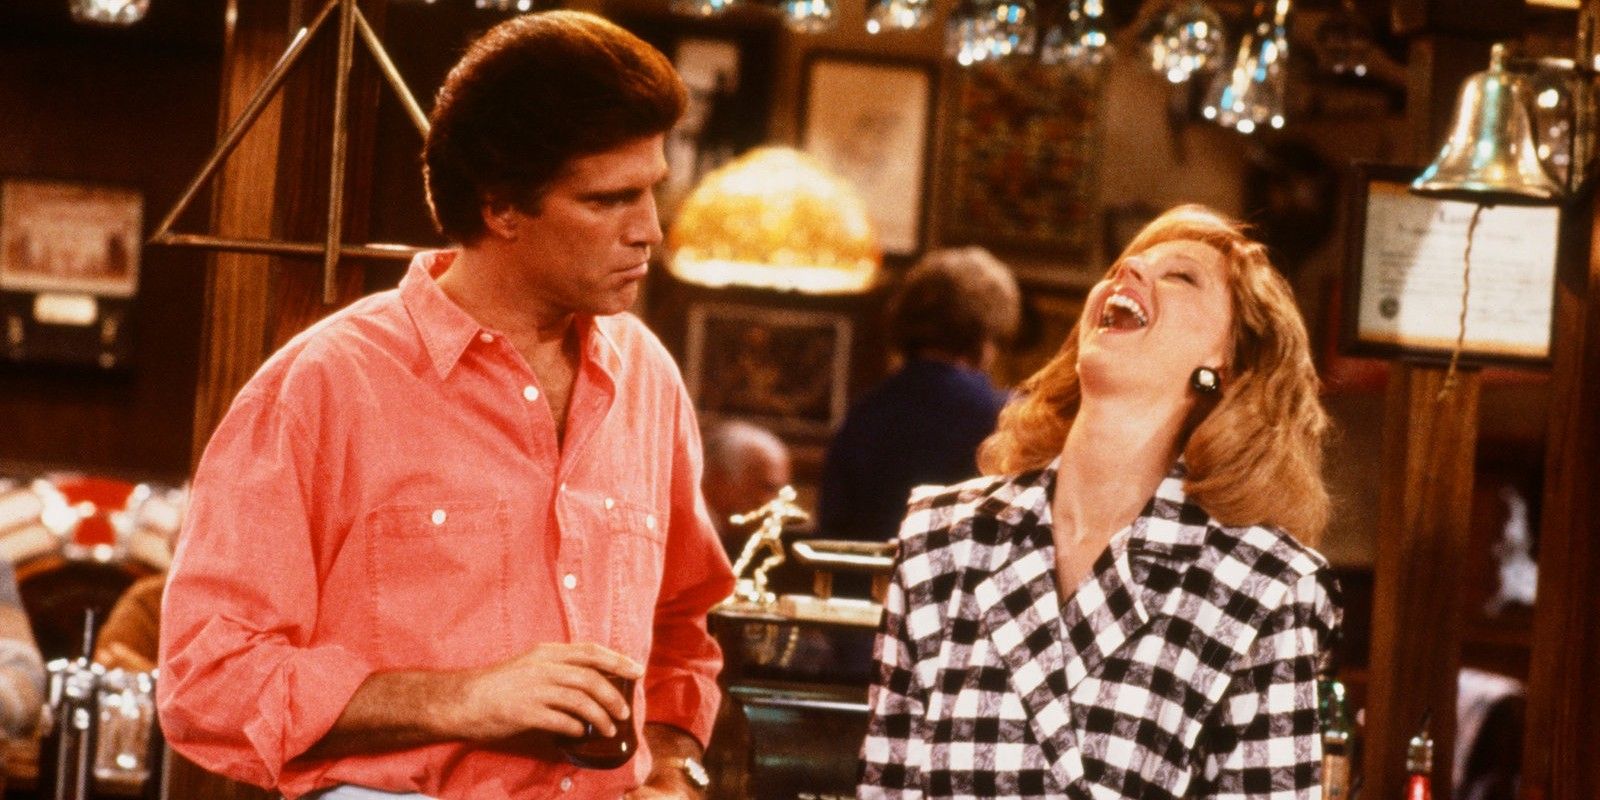 Sam Malone frowning and Diane Chambers laughing in Cheers.